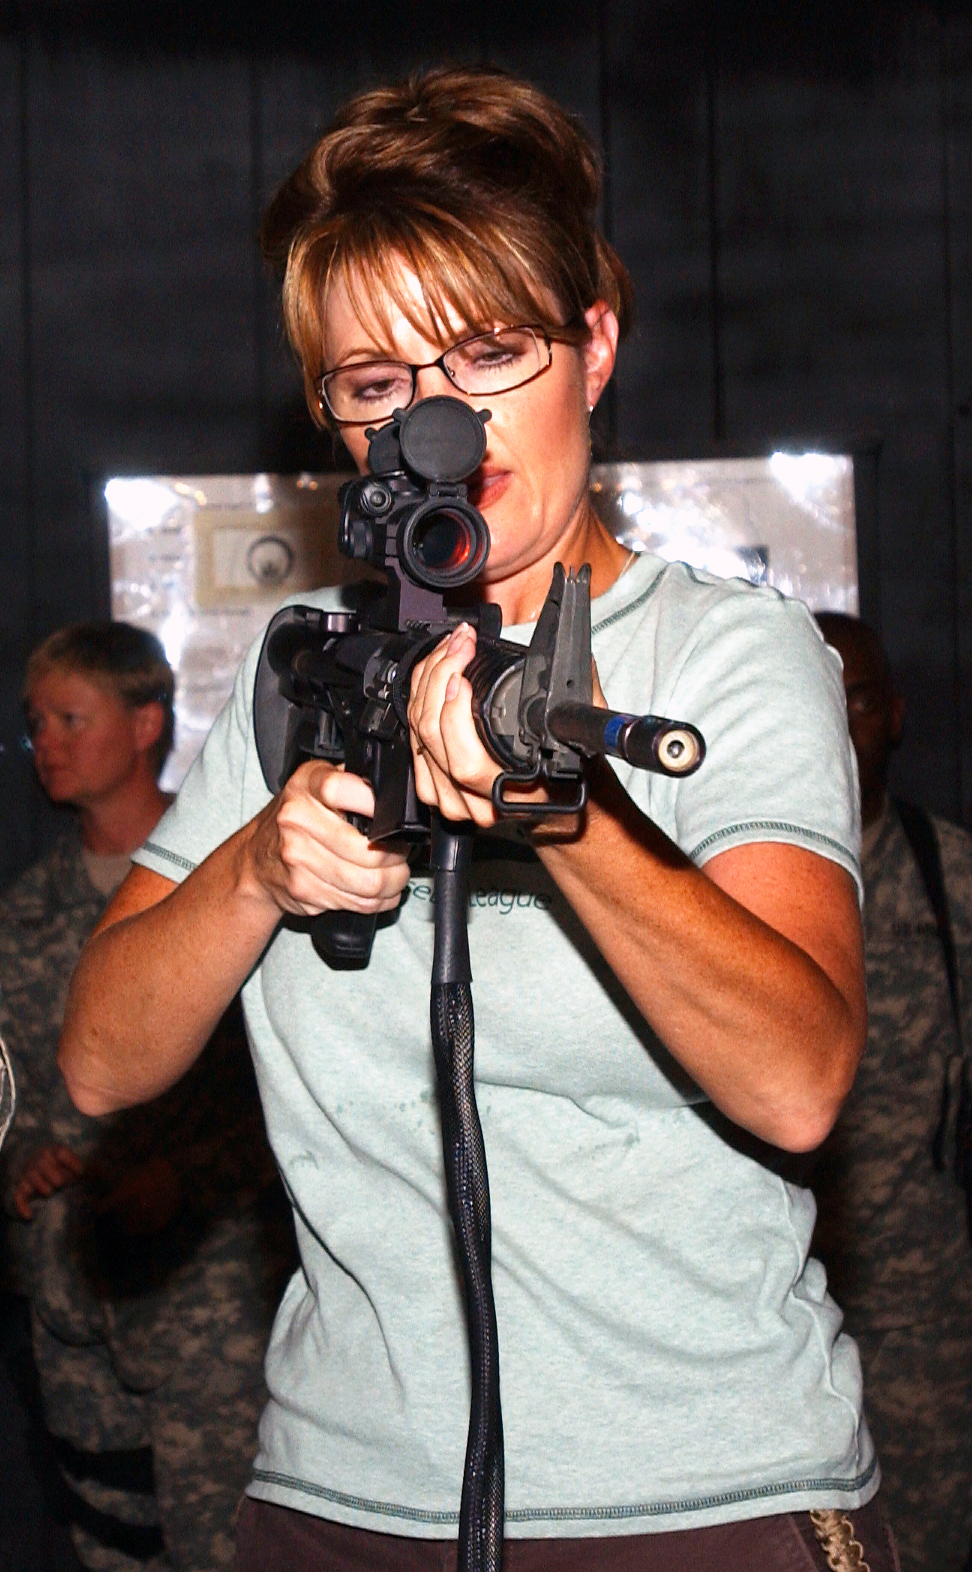 Governor Sarah Palin of Alaska tests out the Engagement Skills Trainer while her visit to the Soldiers of 3rd Battalion, 297th Infantry Regiment, Alaska National Guard to learn about their mission in Kuwait, Camp Buehring, Kuwait, July 24, 2007.